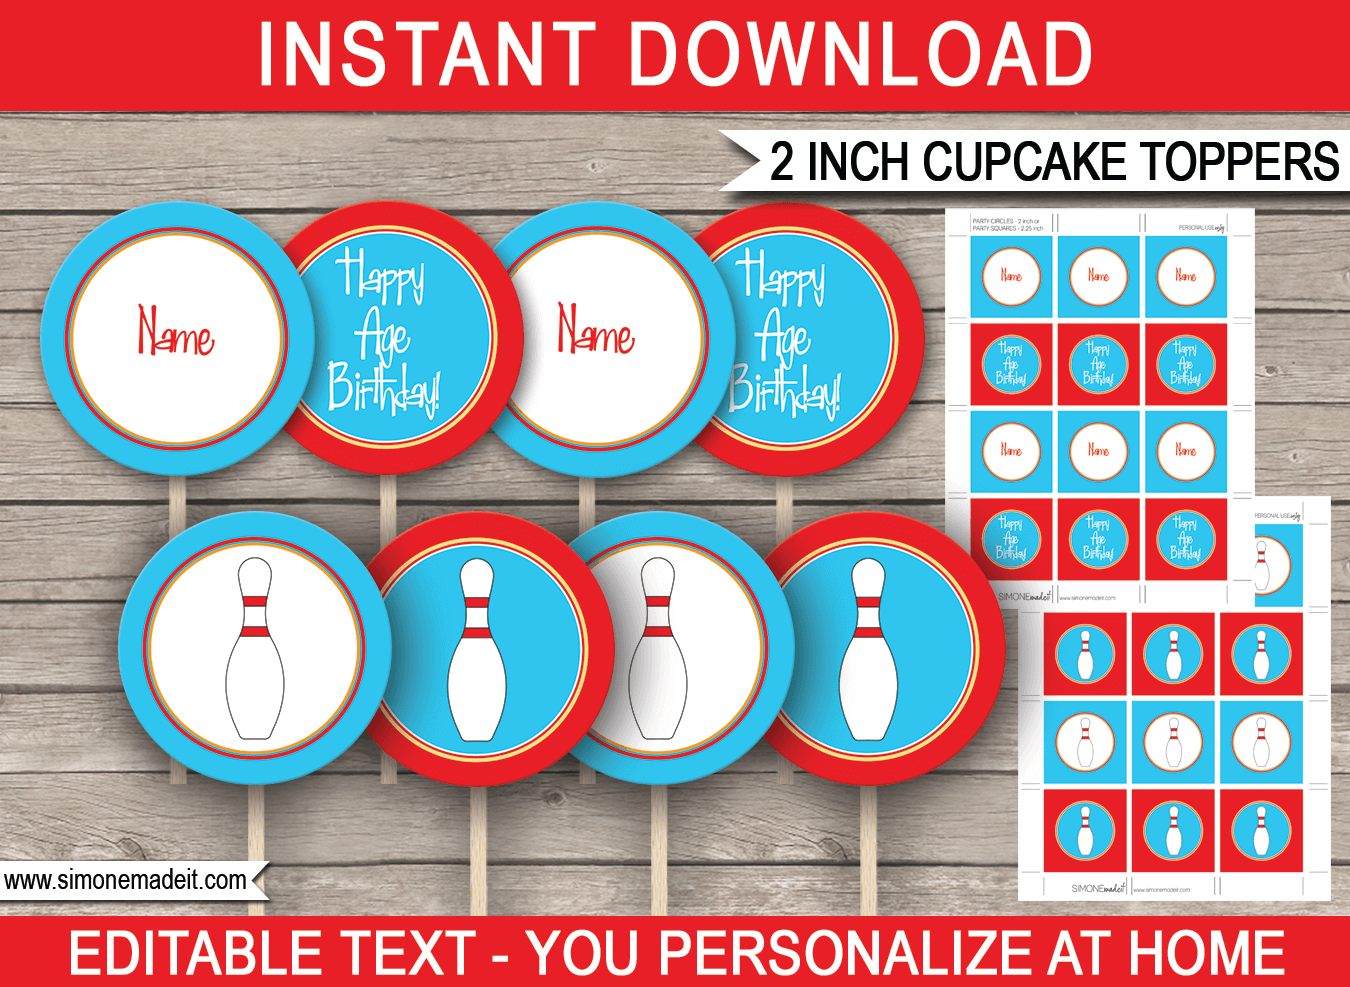 Printable Bowling Party Cupcake Toppers | 2 inch | Gift Tags | DIY Editable & Printable Template | INSTANT DOWNLOAD via simonemadeit.com